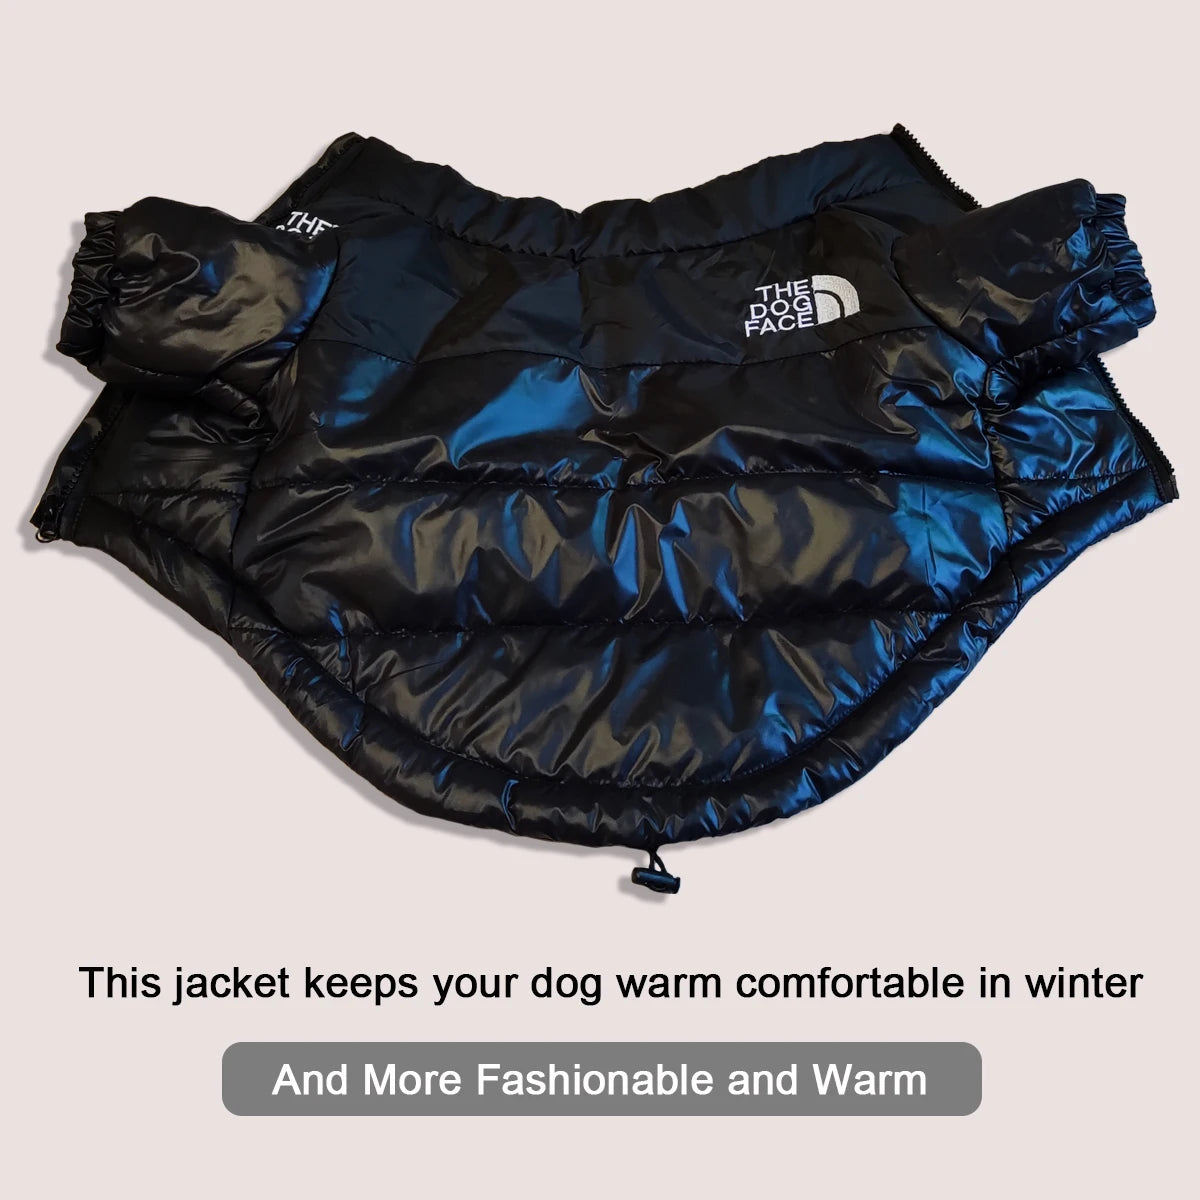 "The Dog Face" Down Puffer Jacket